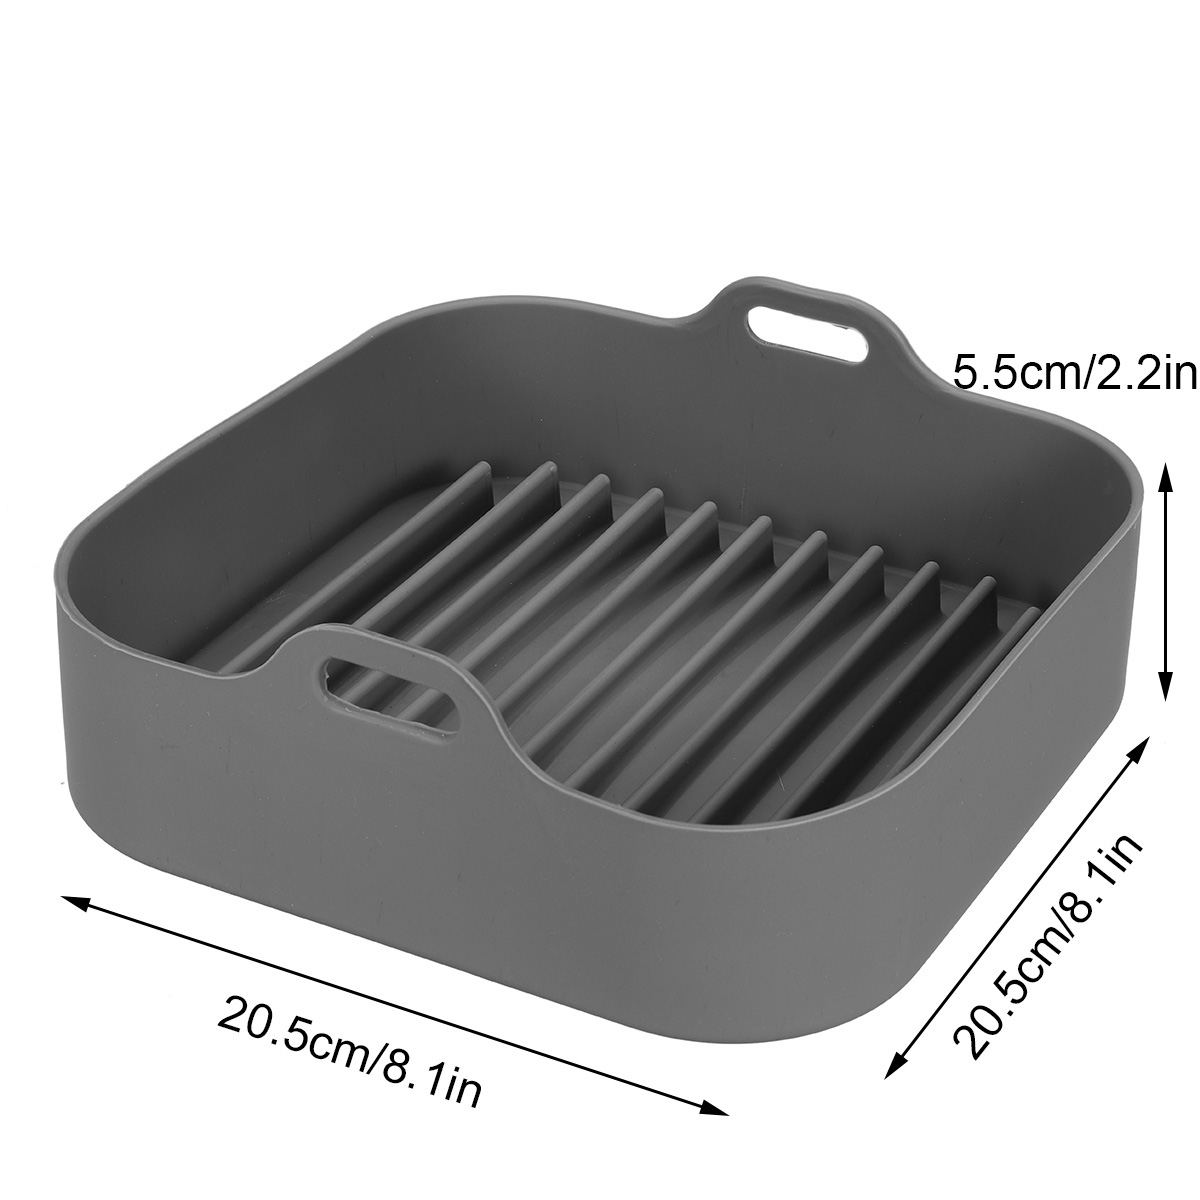 Multifunctional-Silicone-Baking-Tray-High-Temperature-Resistant-Non-stick-Bread-Fried-Baking-Pan-wit-1864776-9